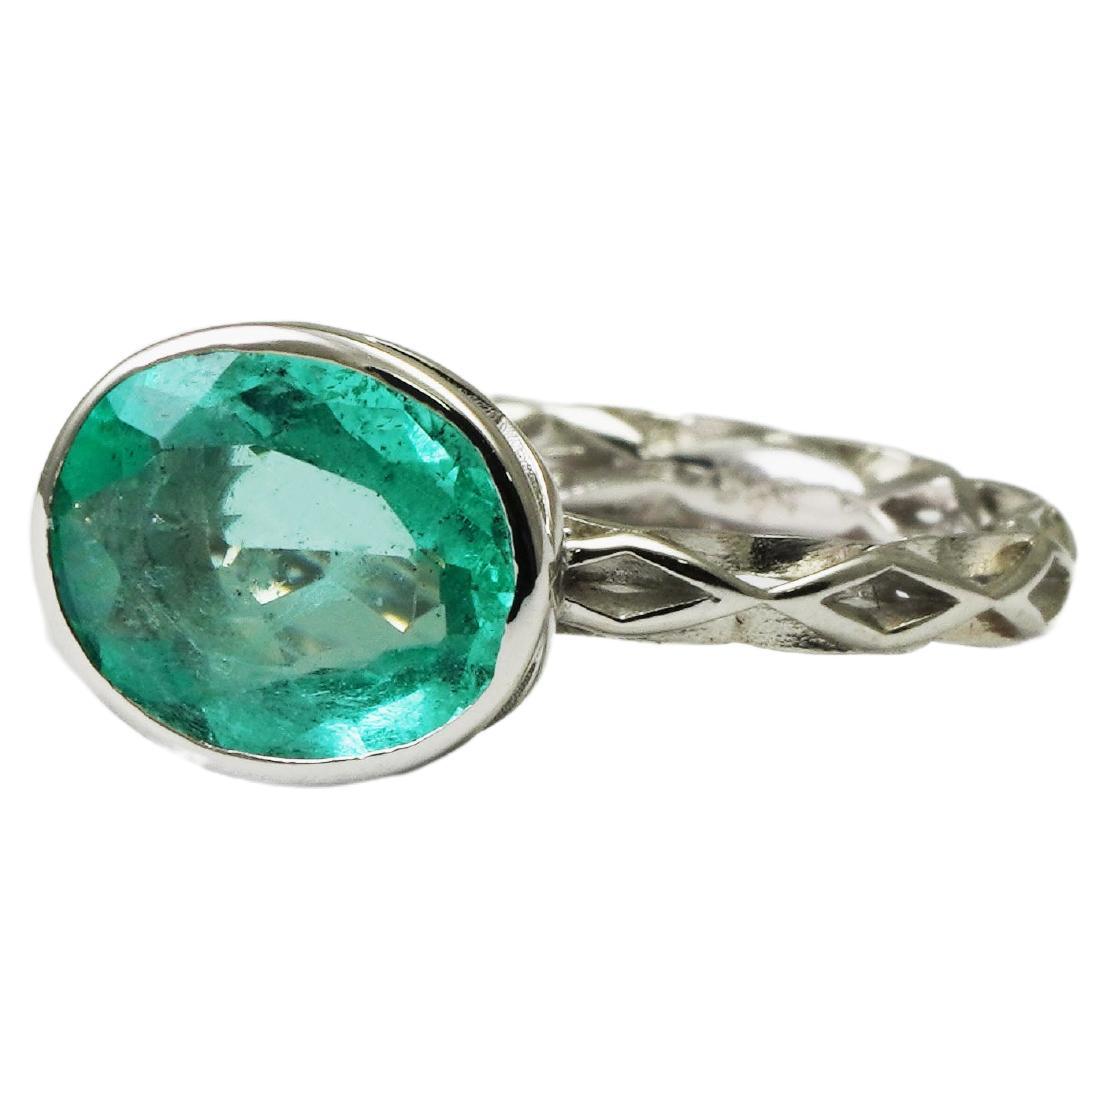 1.83 Carat Colombian Emerald Ring